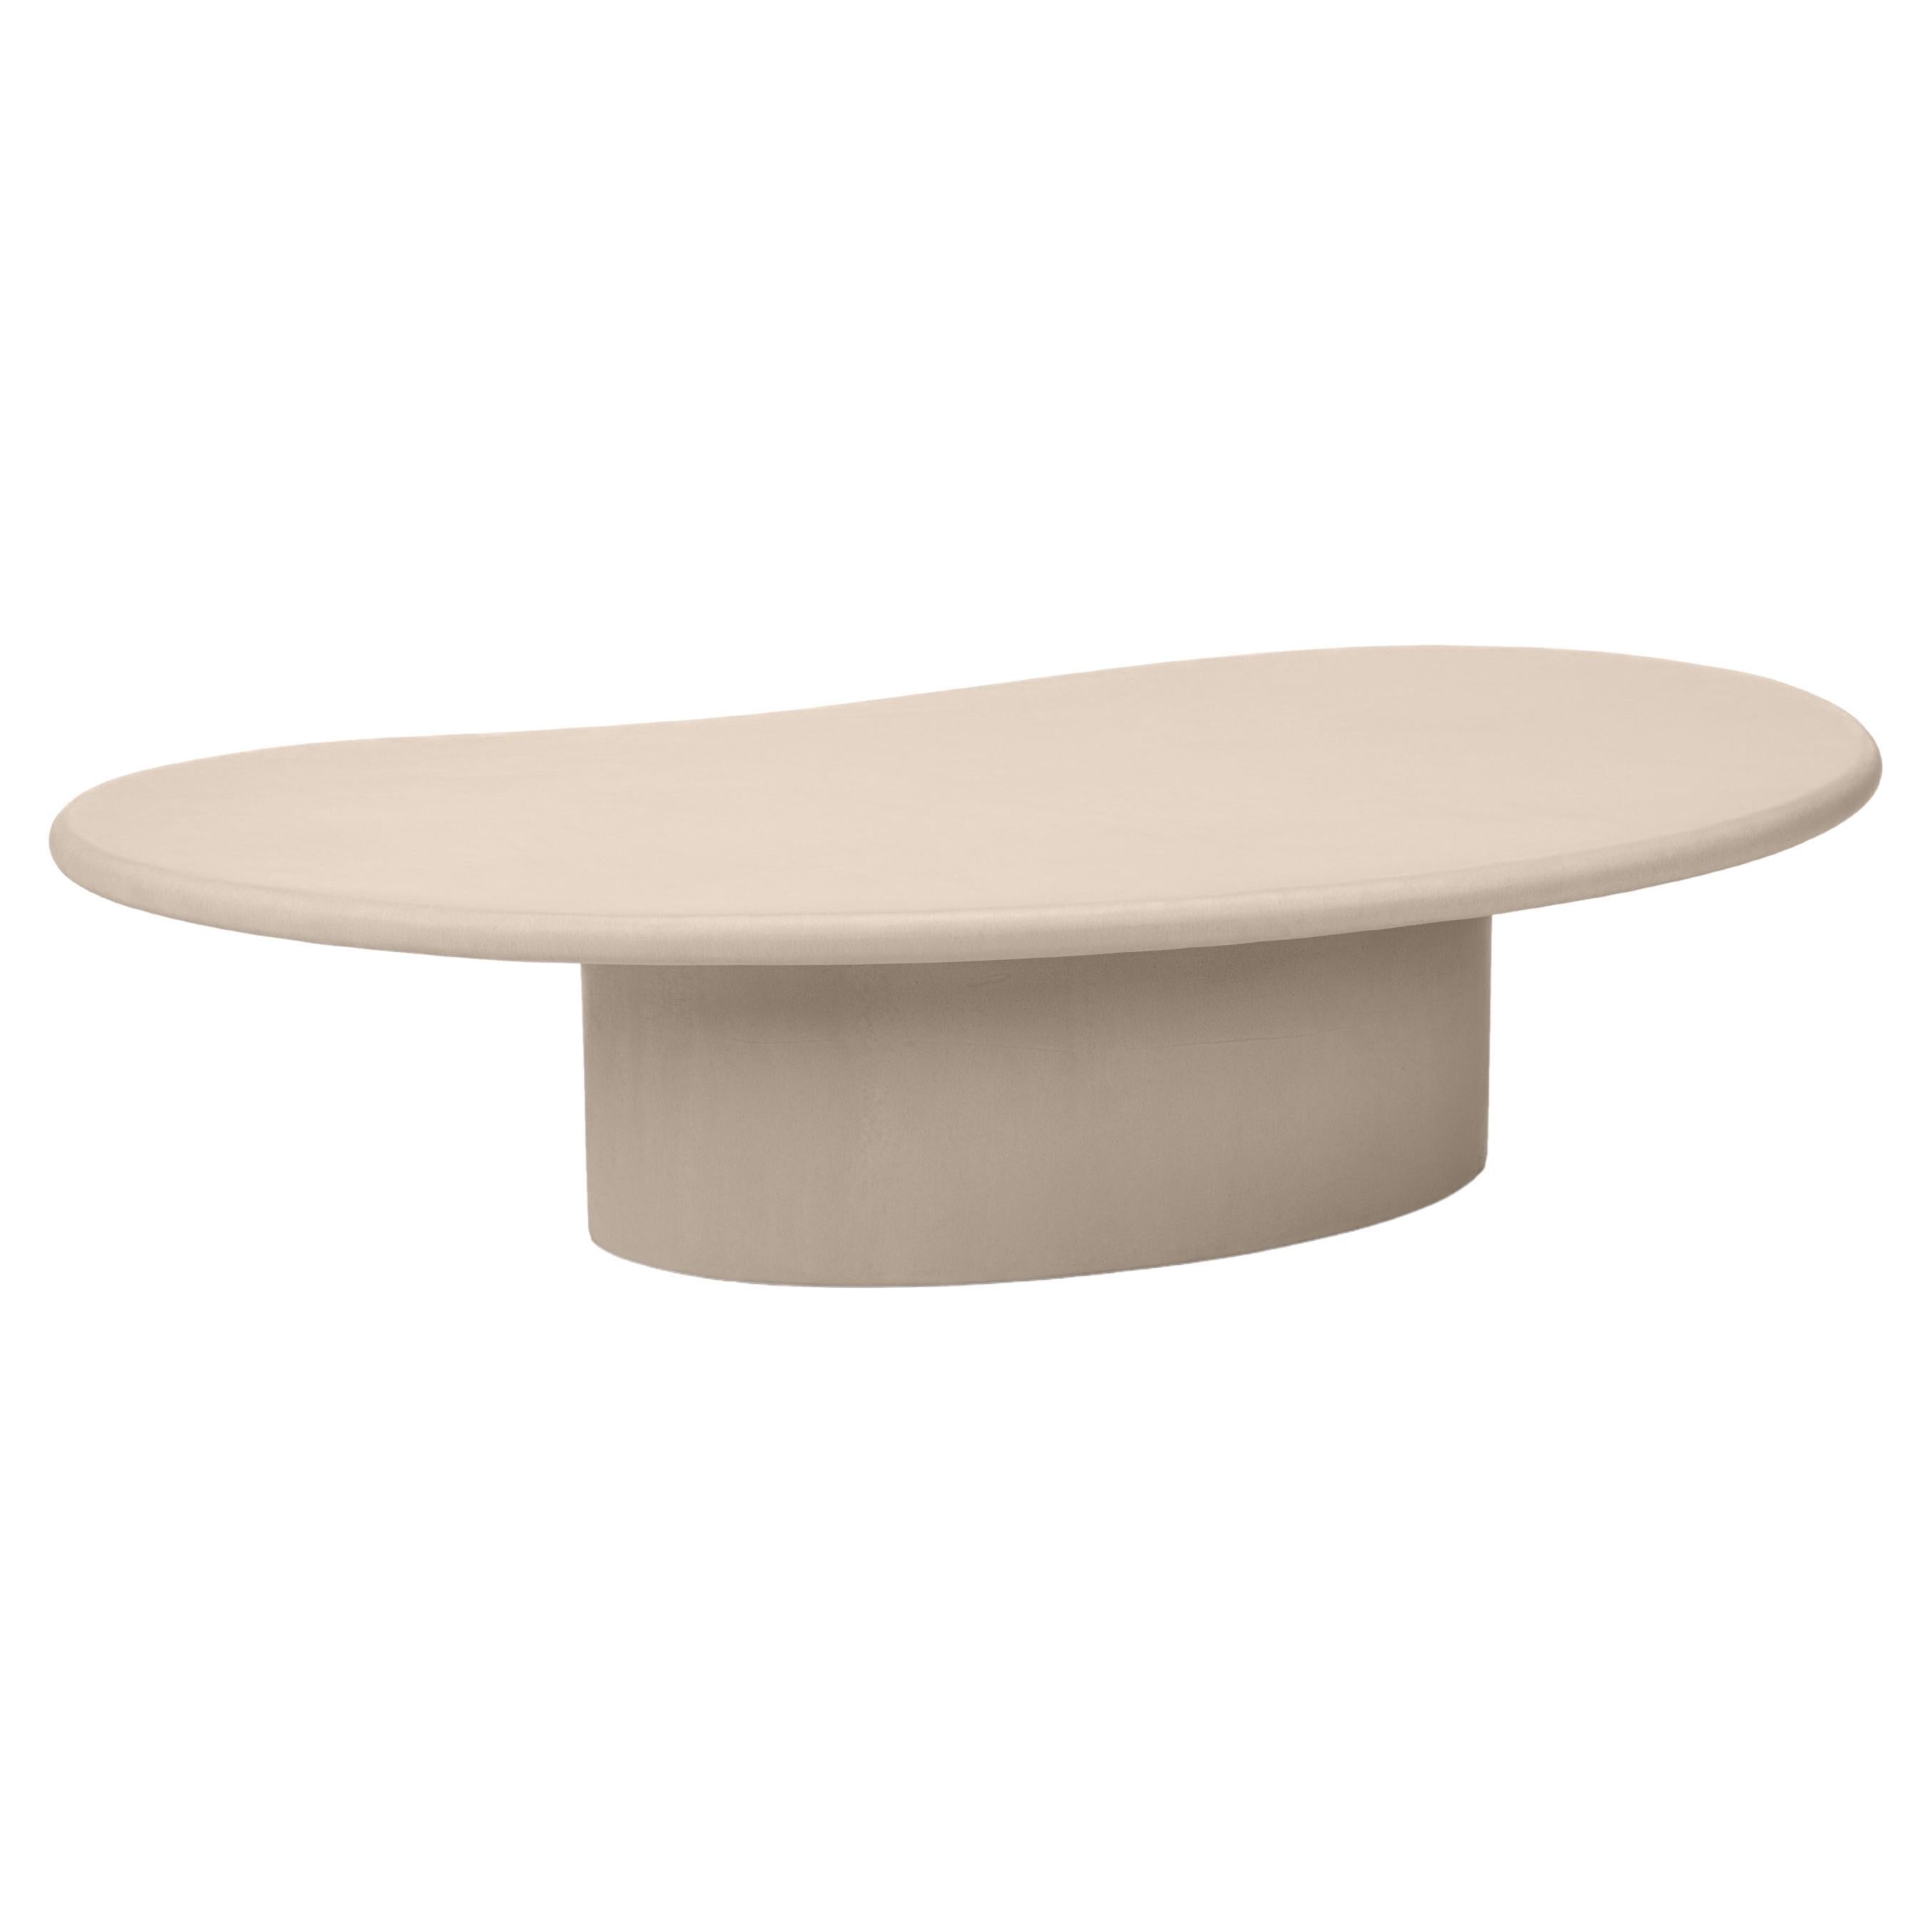 Organic Shaped Natural Plaster Coffee Table "Angus" 150 by Isabelle Beaumont